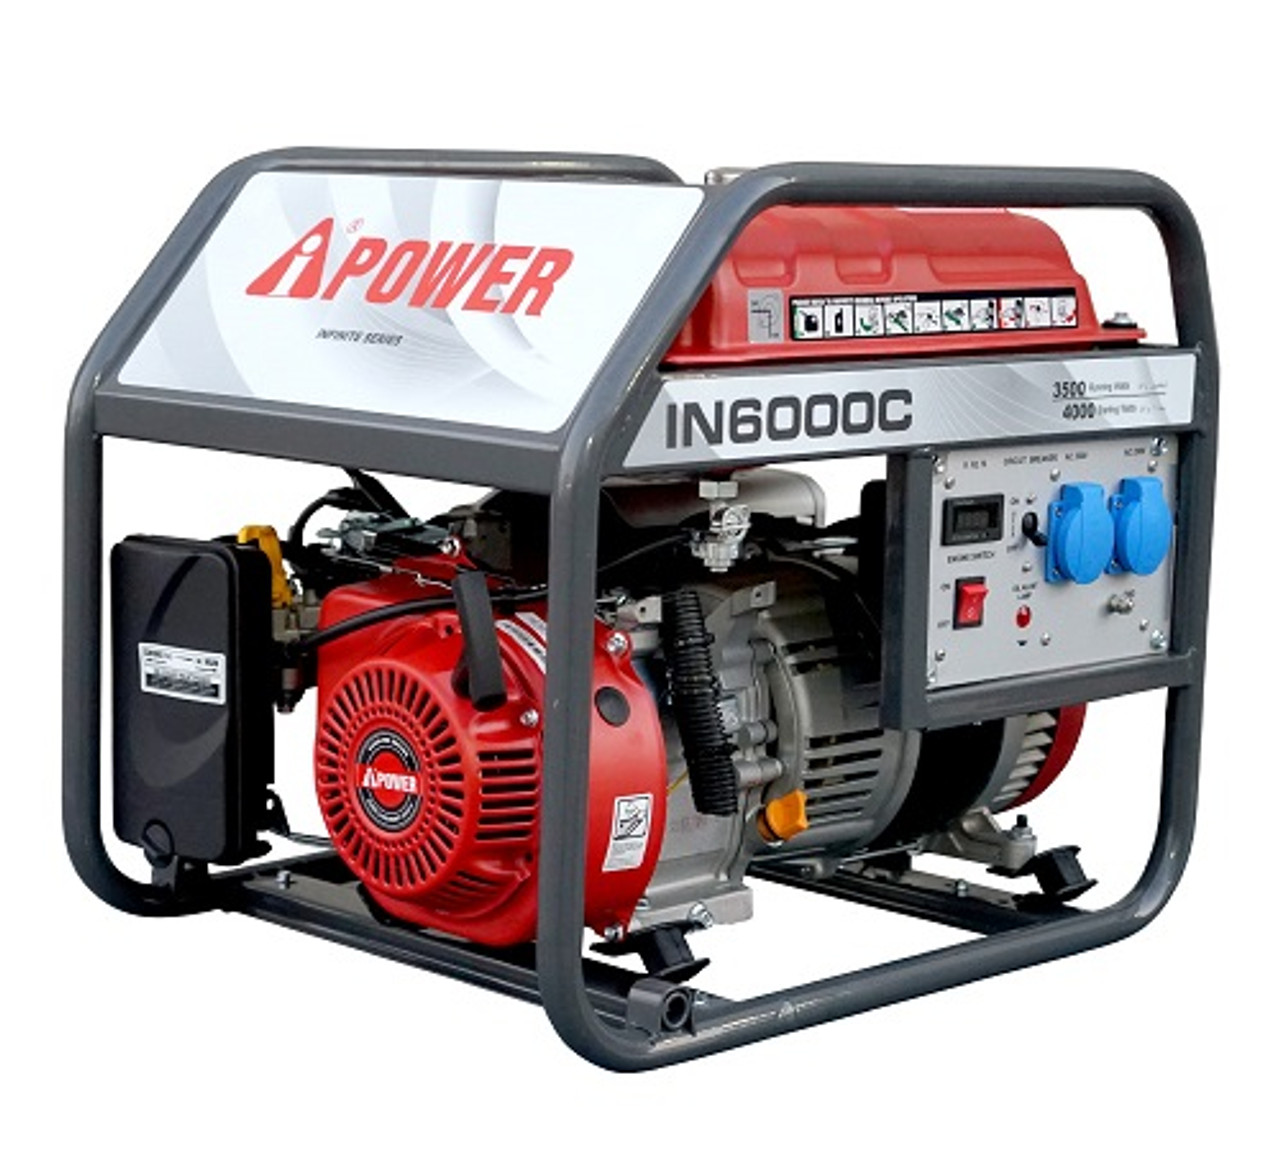 https://cdn11.bigcommerce.com/s-x3ki4mm/images/stencil/1280x1280/products/5117/6668/Gasoline_Generator_INFINITE_SERIES_3.3kw-4.0Kva_IN6000C_A-iPower__71675.1670512682.jpg?c=2?imbypass=on